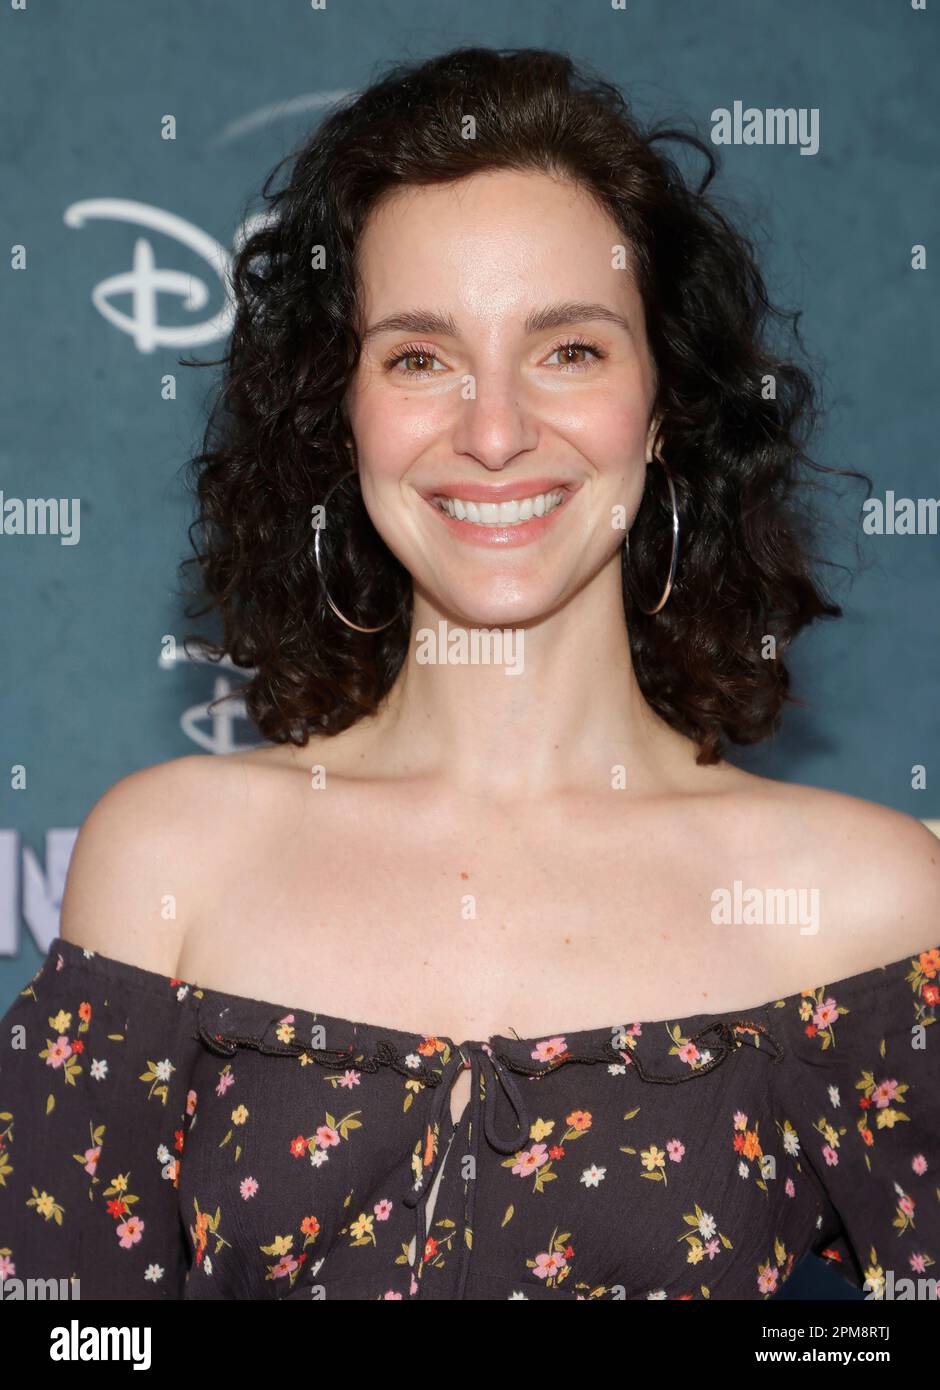 Los Angeles, Ca. 11th Apr, 2023. Carla Baratta at the Disney  premiere of Rennervations at the Westwood Regency Village Theatre in Los Angeles, California on April 11, 2023. Credit: Faye Sadou/Media Punch/Alamy Live News Stock Photo